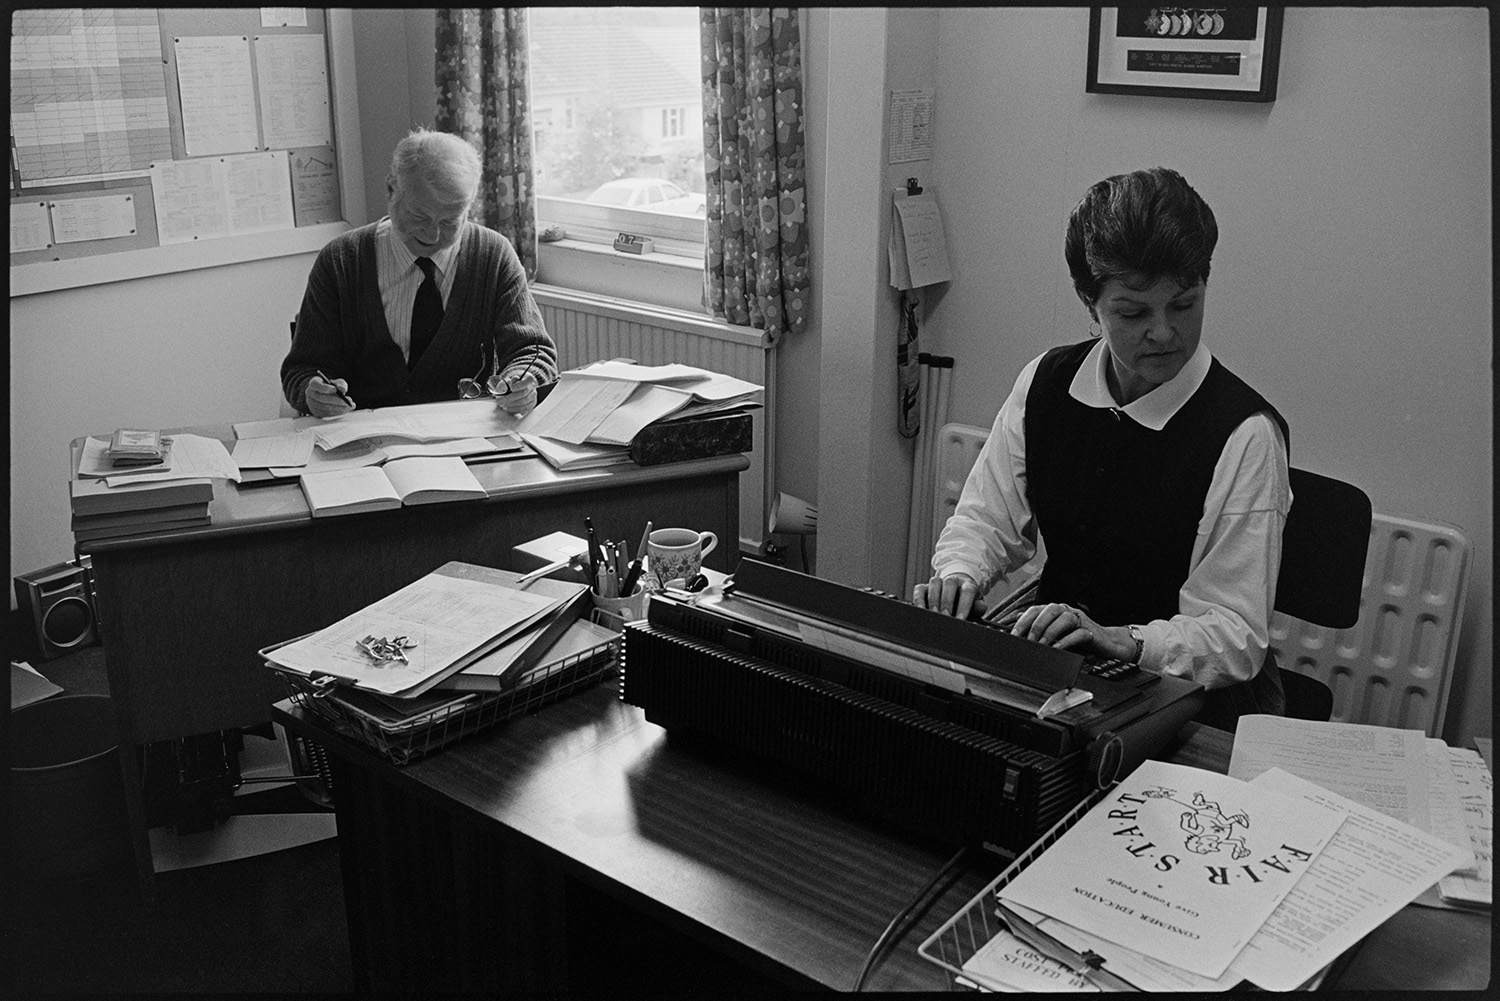 School lessons in classroom, examiners looking at art work. Secretary.
[Secretary working at her desk, using a typewriter, at Chulmleigh Community College. A man is also in the office working at another desk with various papers.]